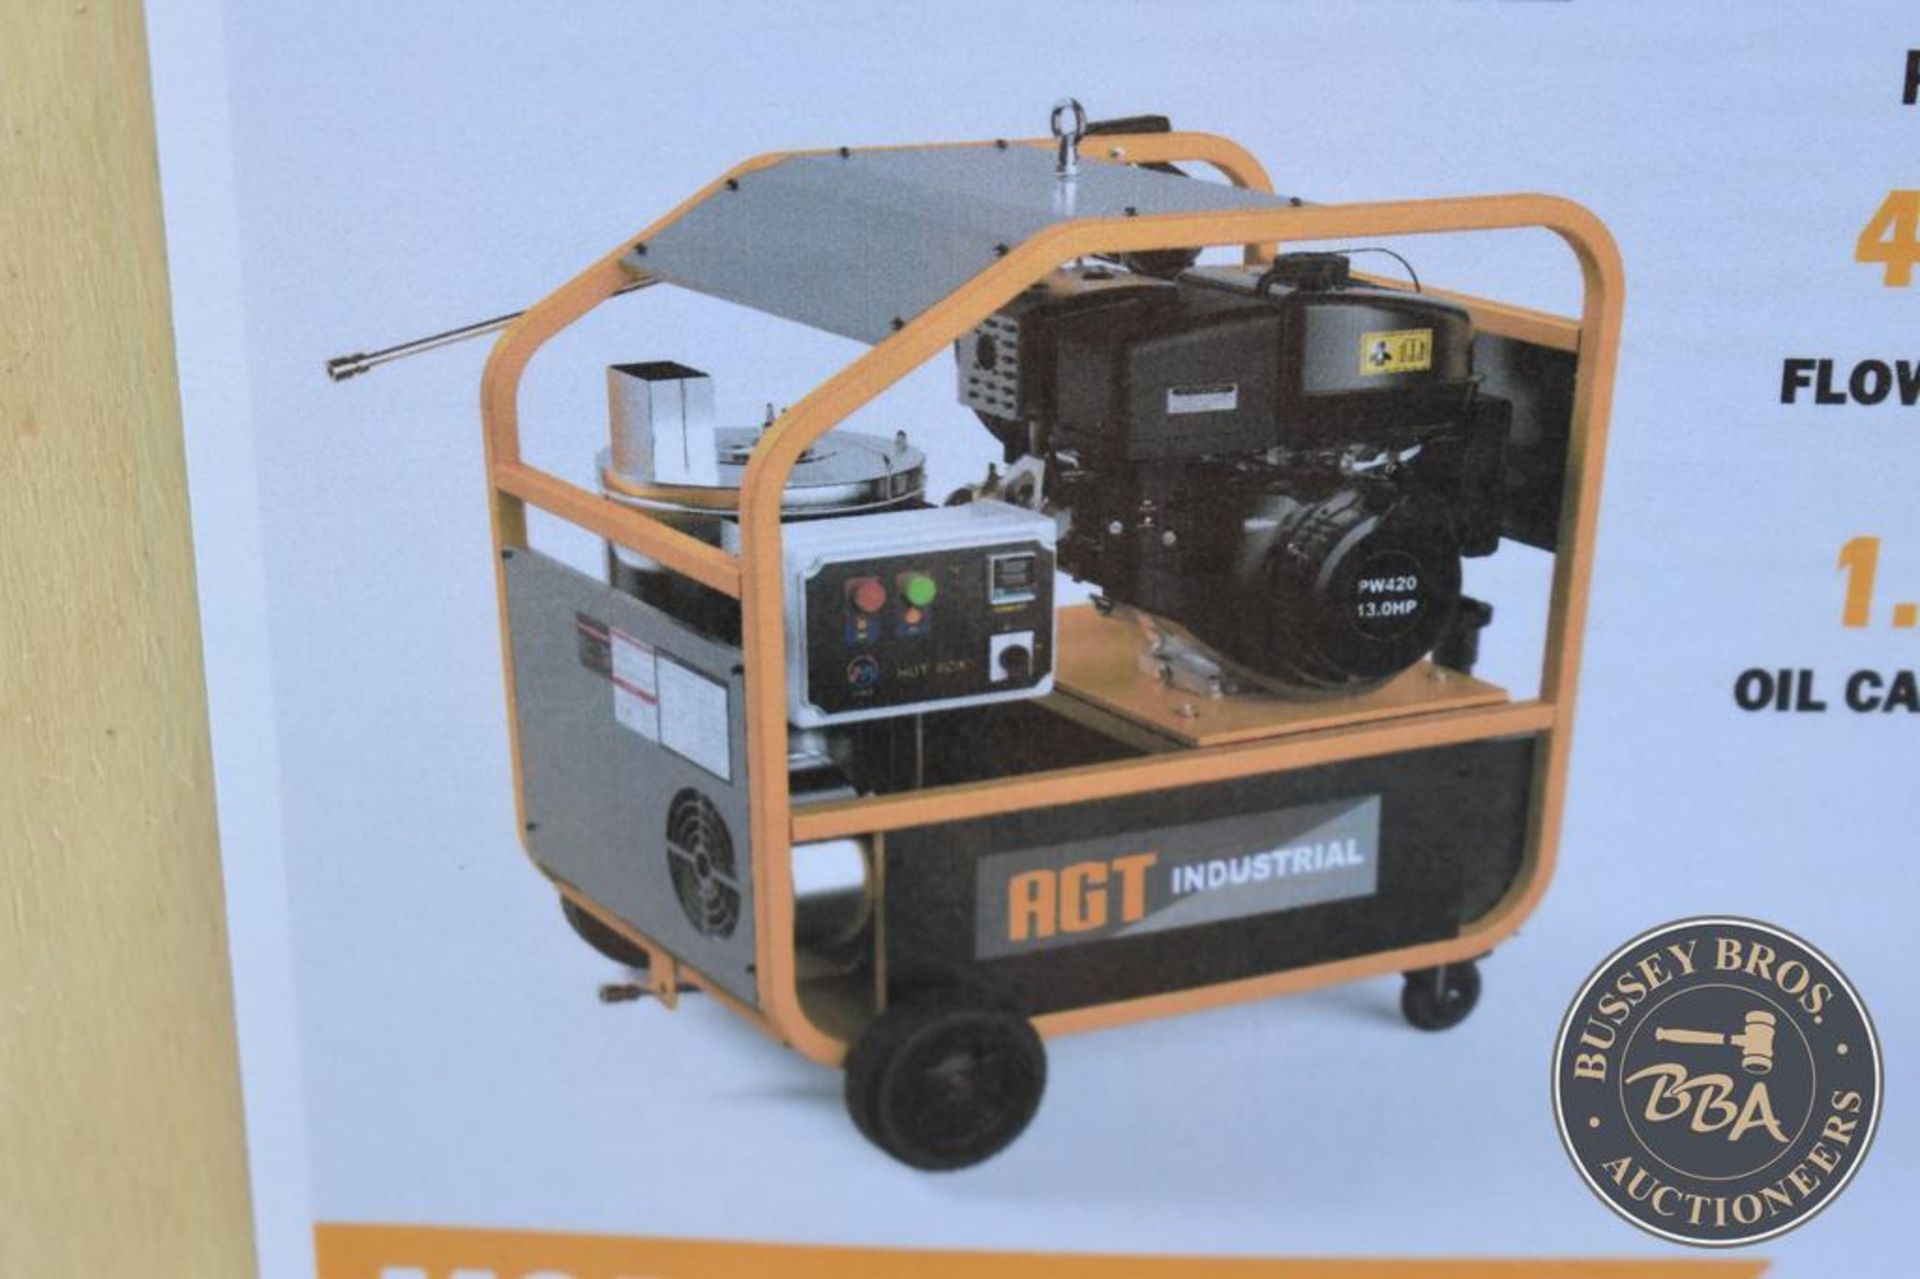 AGT INDUSTRIAL 4000PSI HOT WATER PRESSURE WASHER 27486 - Image 3 of 7